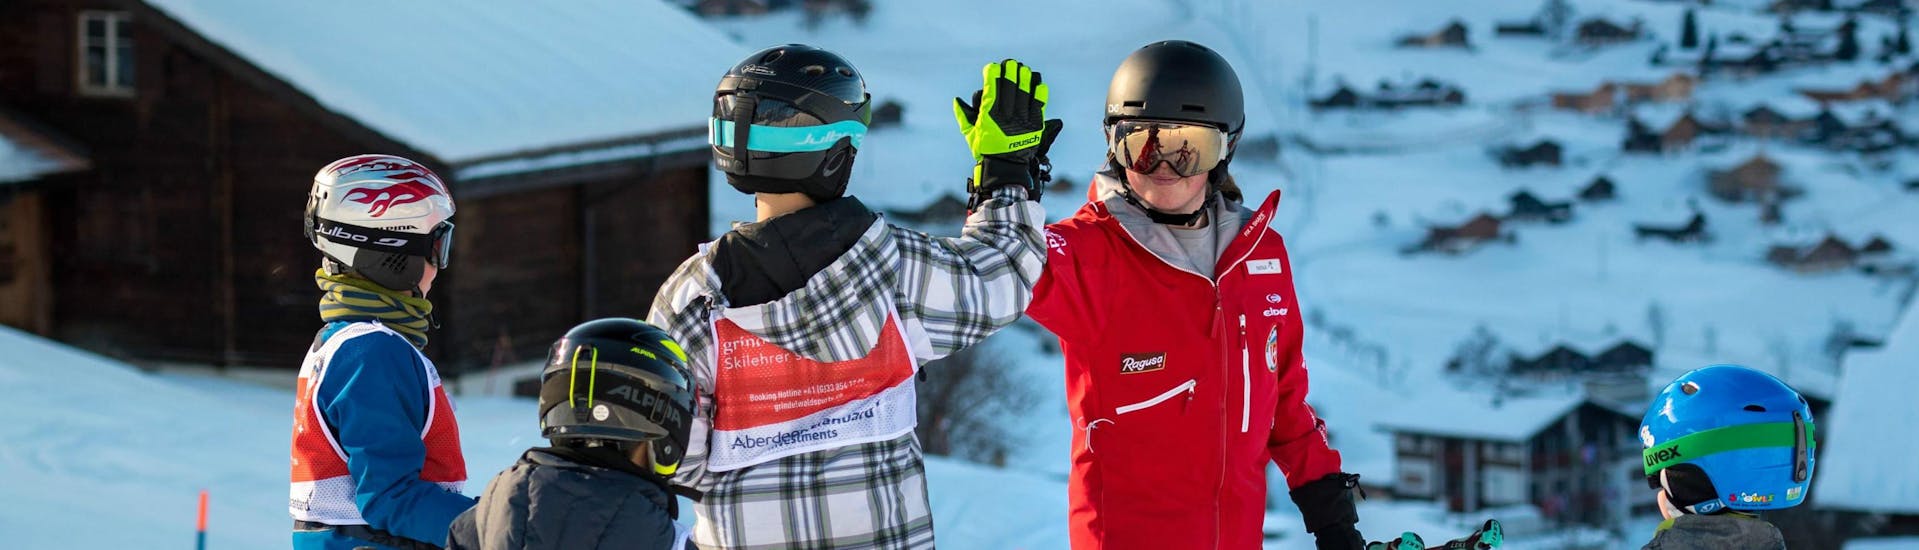 A group of young skiers have fun with their instructor and give him a high-five during their kids ski lessons for advanced skiers with Grindelwald Ski School.